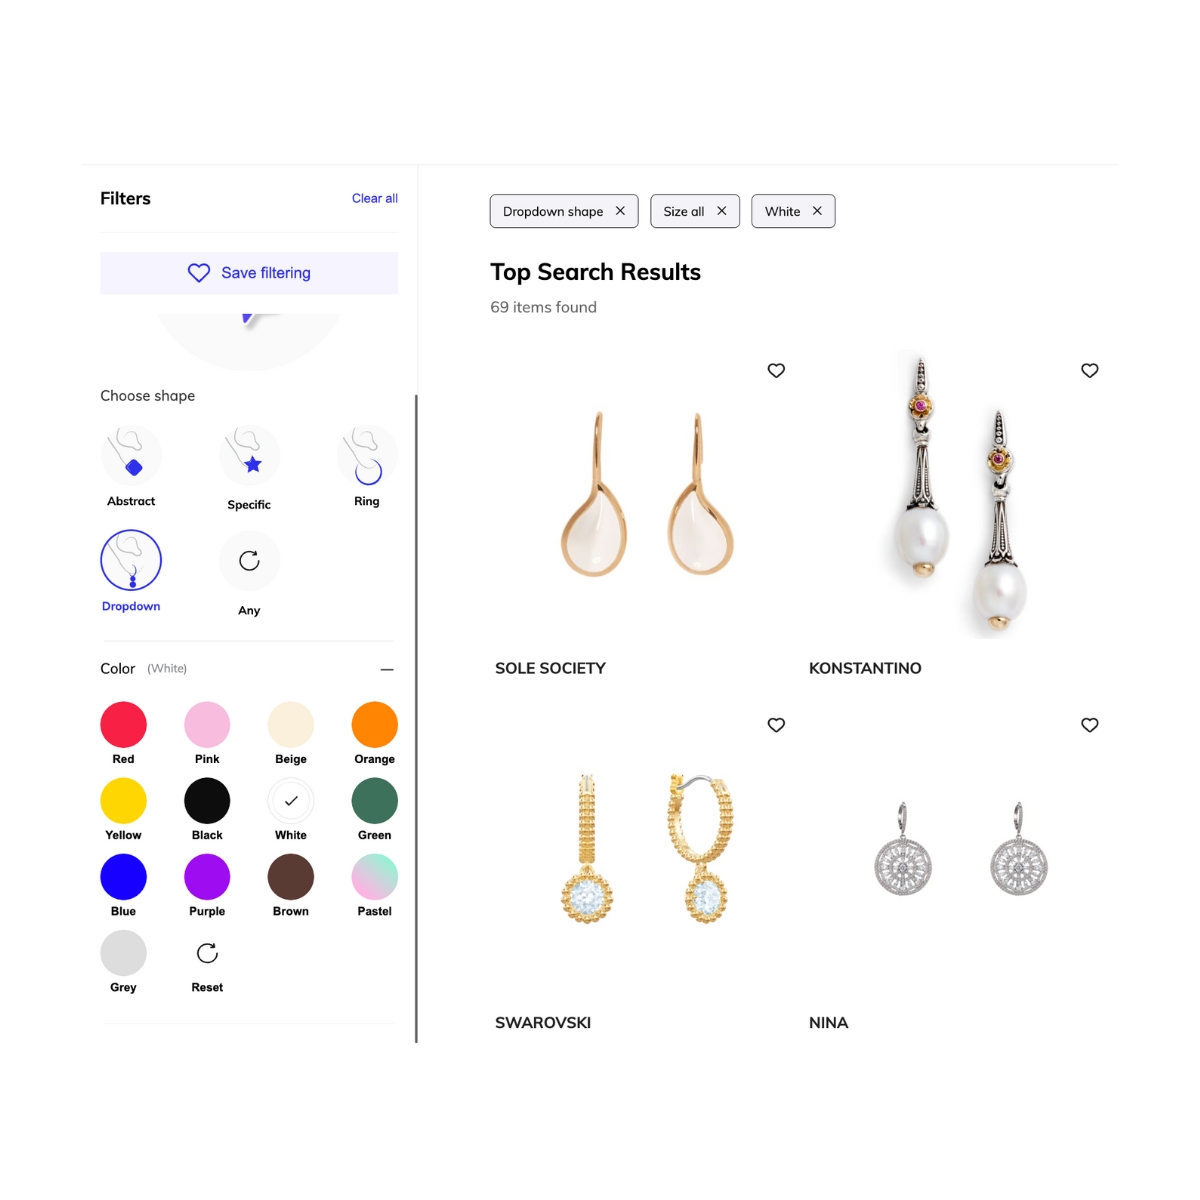 Dropdown earrings with white color filter using fashion AI